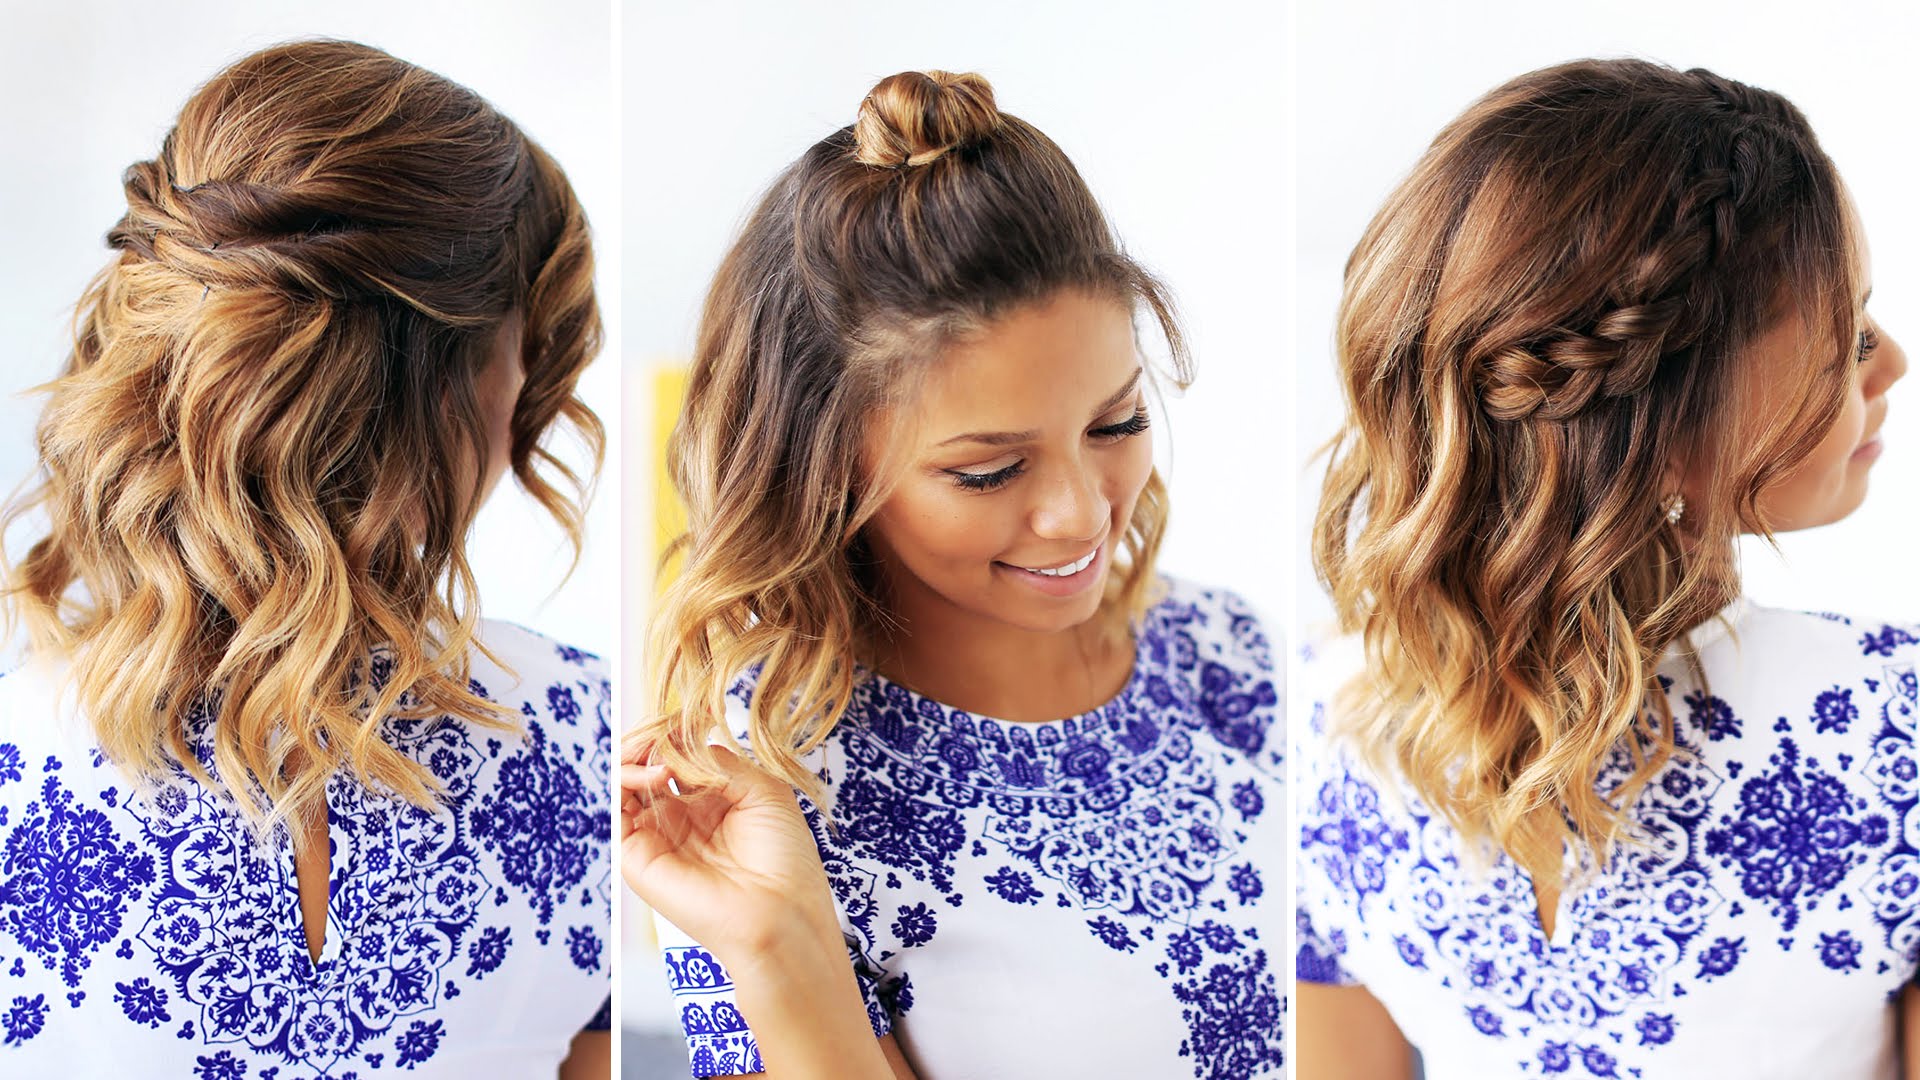 Hairstyles which can be done within 5 minutes